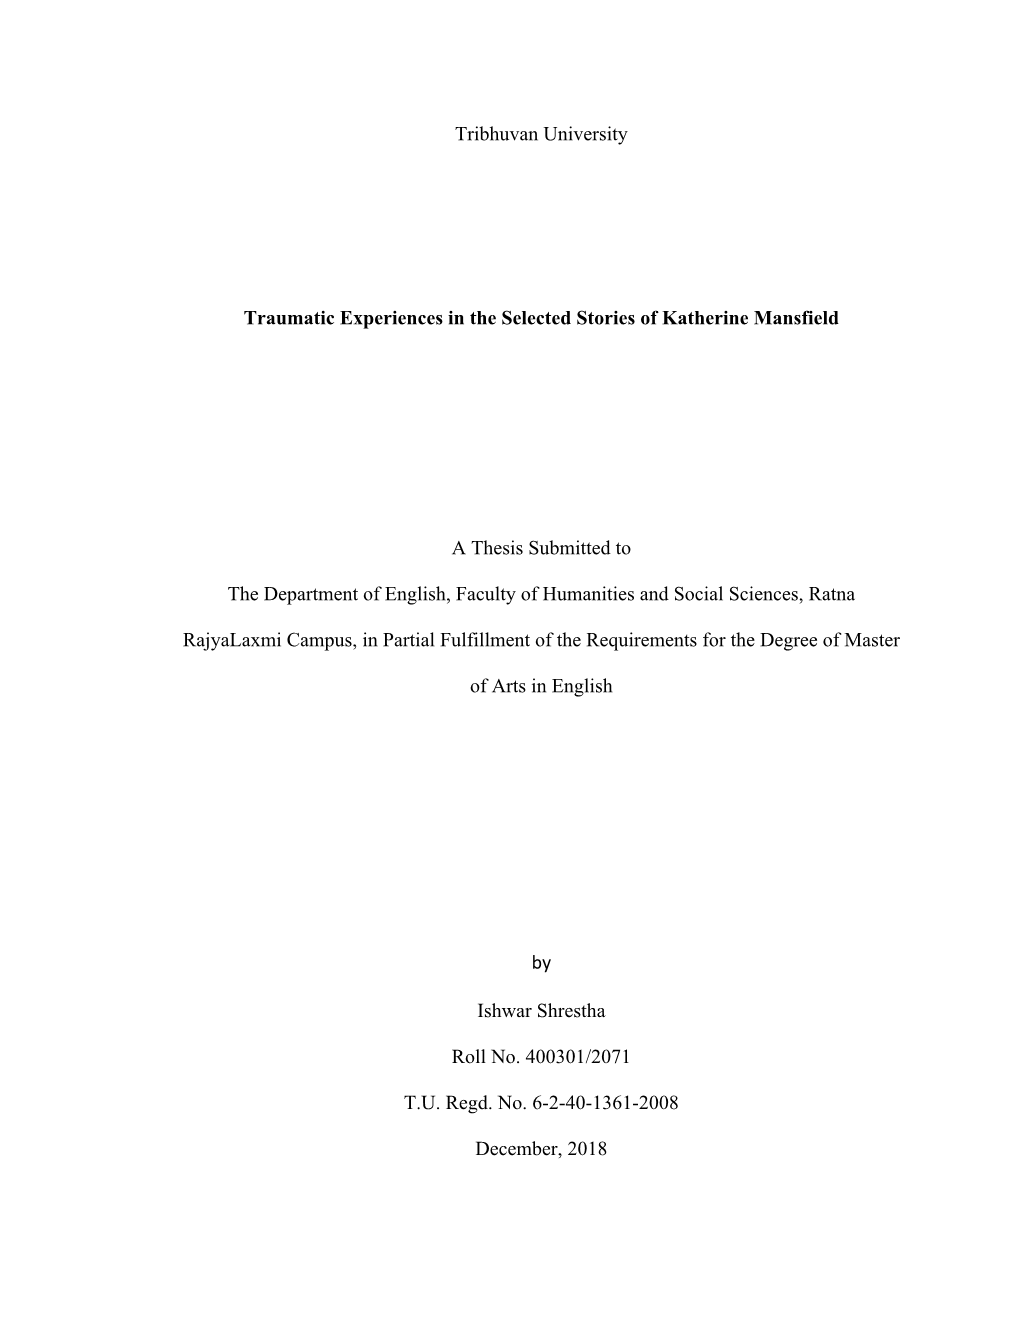 Tribhuvan University Traumatic Experiences in the Selected Stories of Katherine Mansfield a Thesis Submitted to the Department O